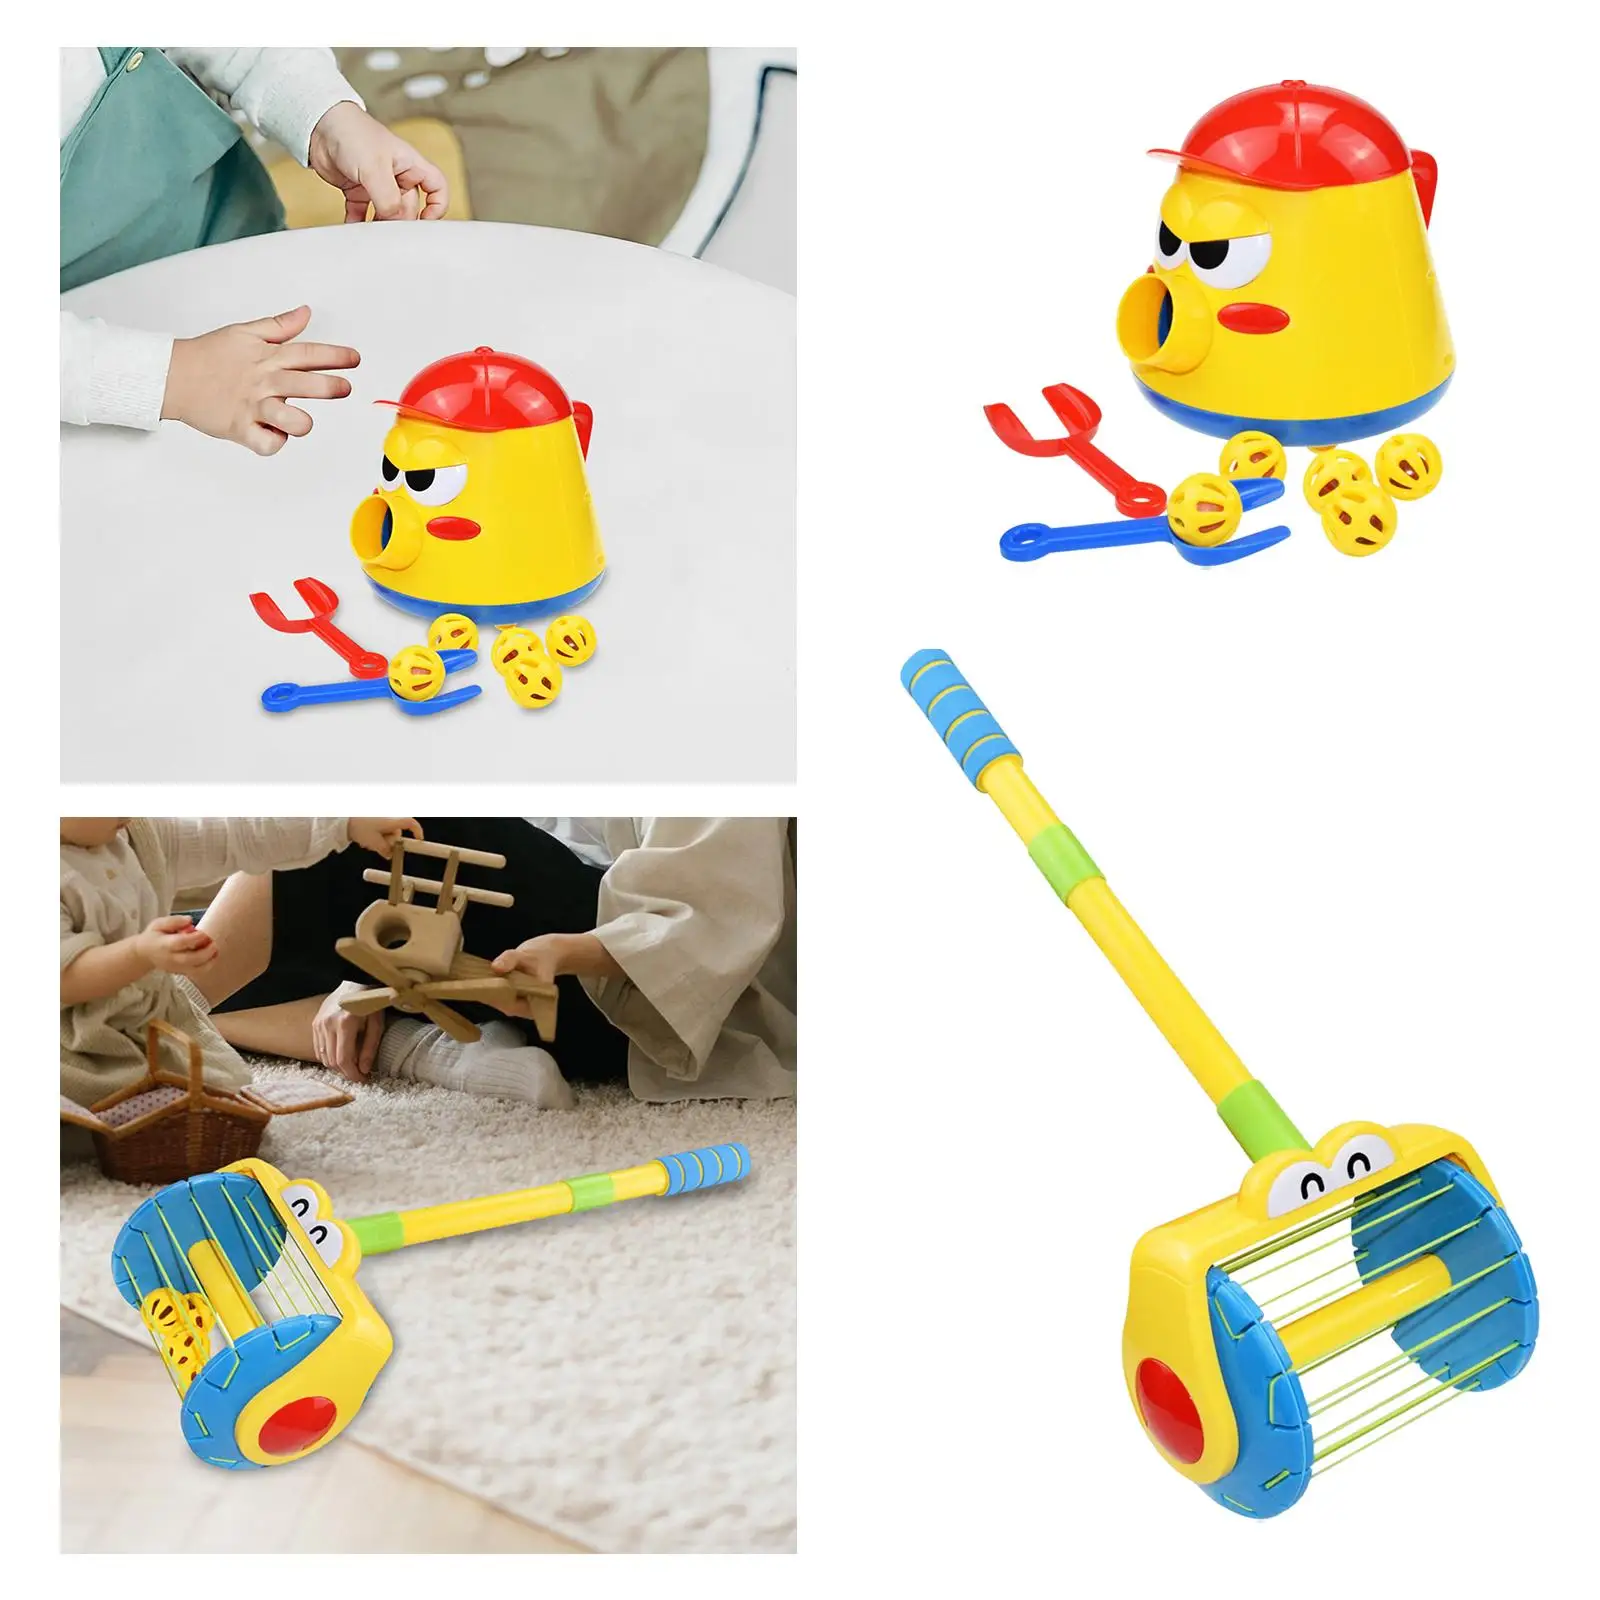 Launching Ball Kids Toy Durable Material Cute Appearance Kids 2 Years up